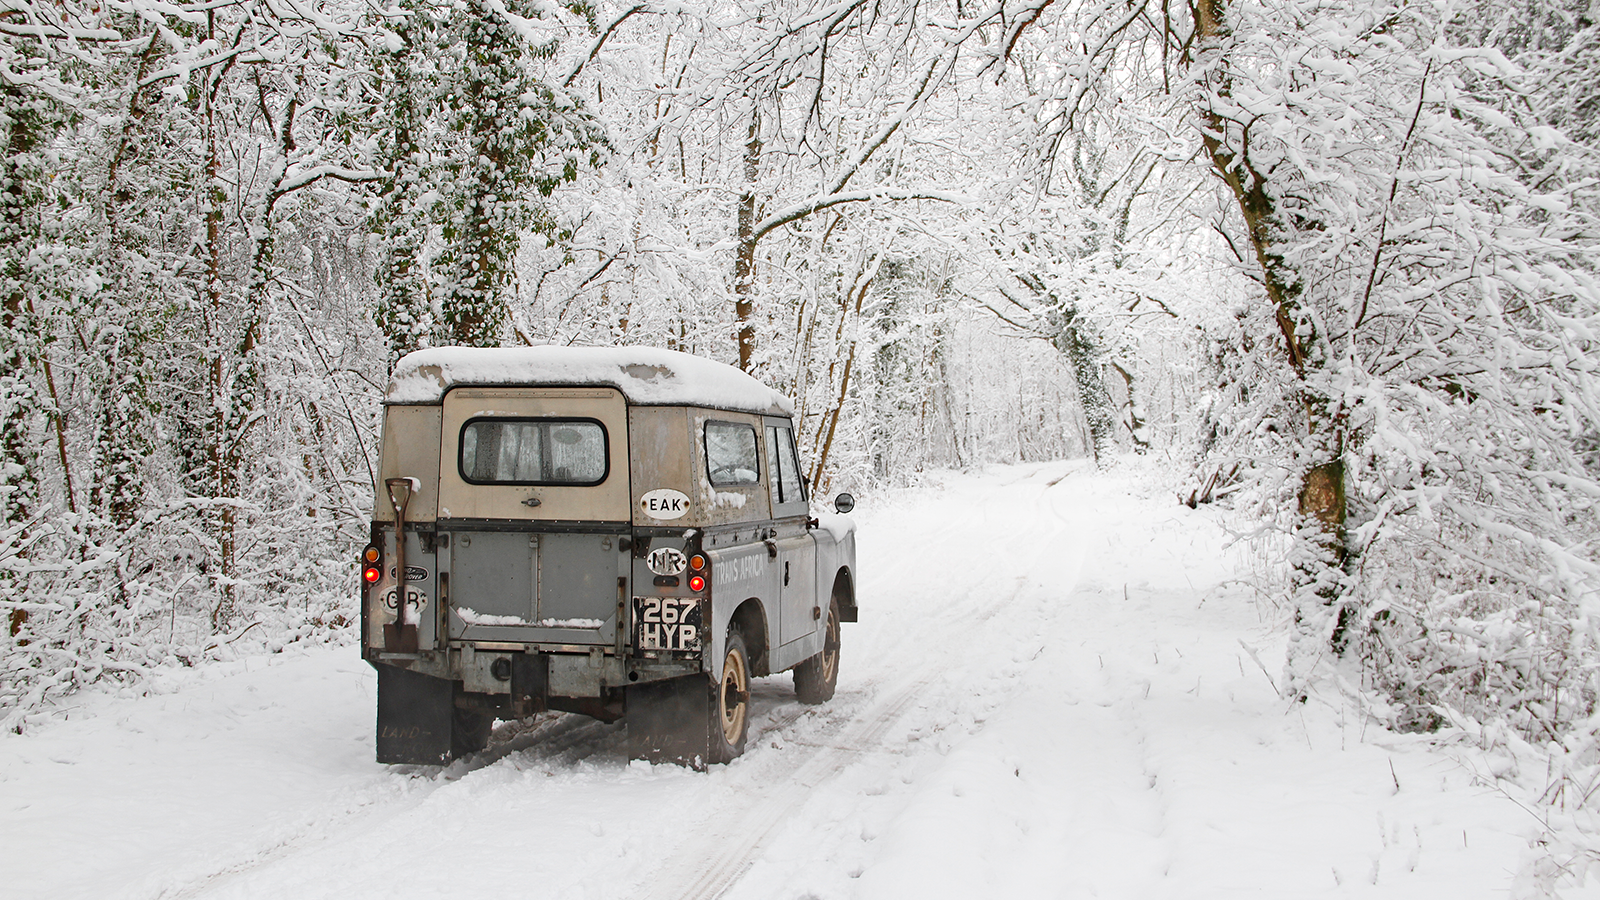 Winter is coming: how to keep your classic safe in cold weather